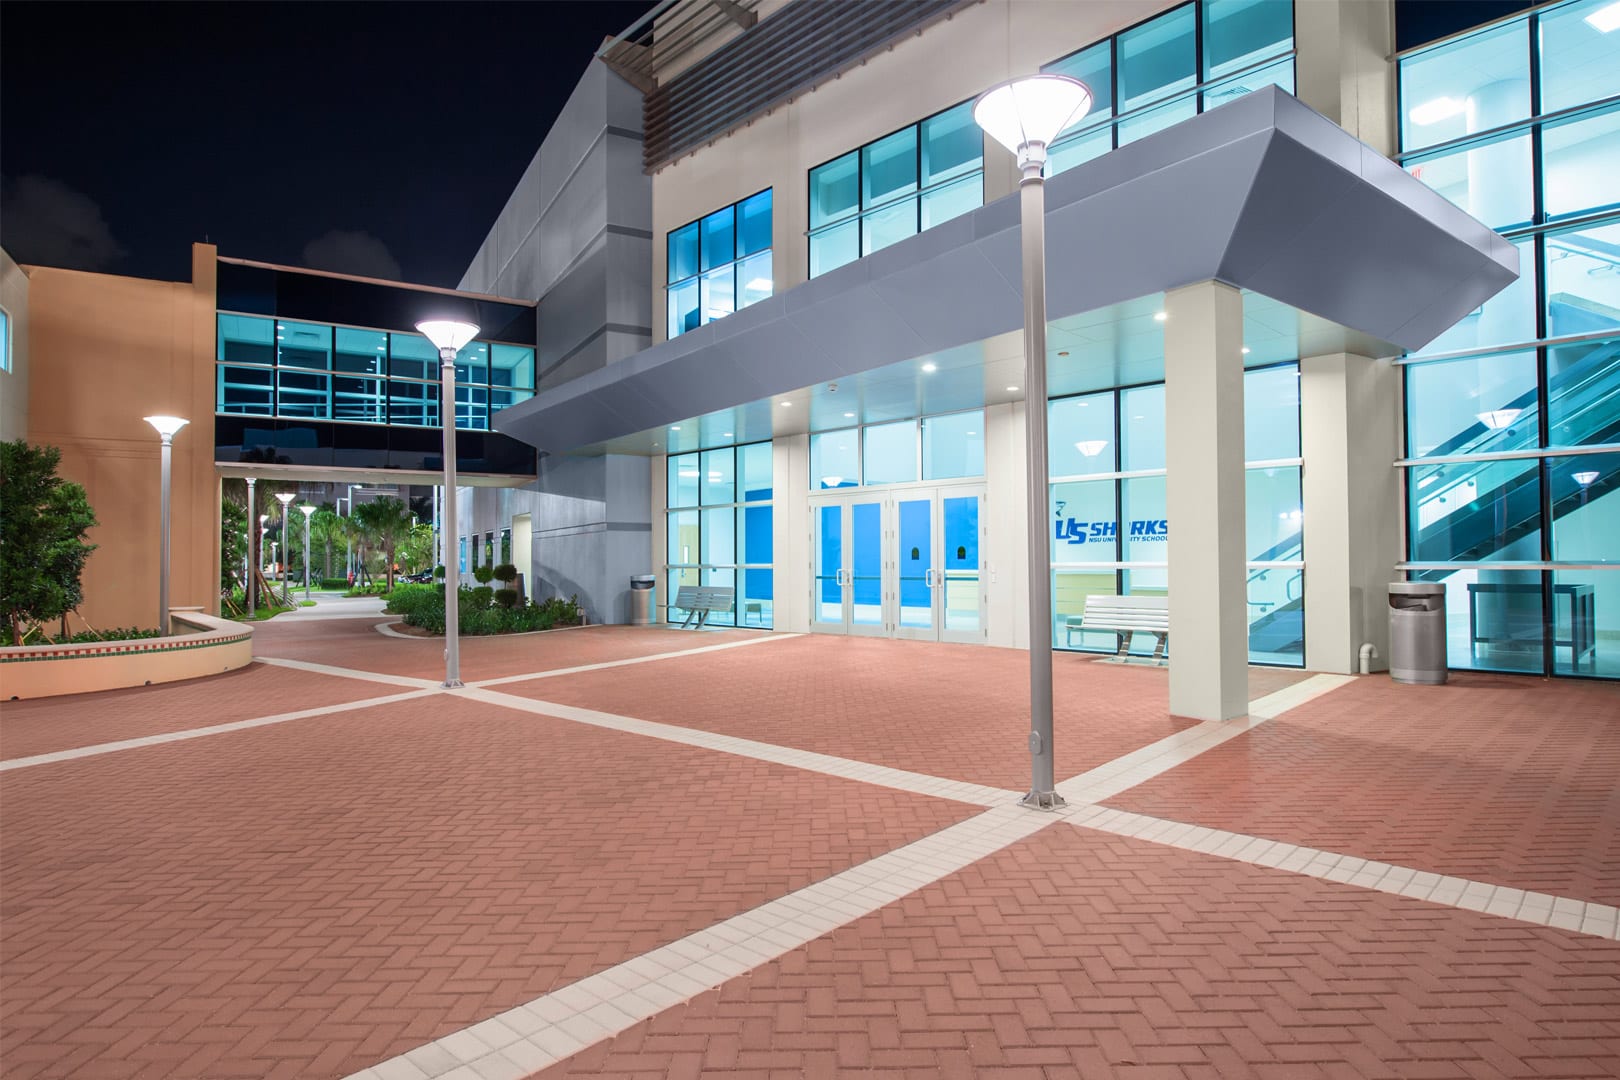 IU C&I Studio Portfolio and Page Grycon Nova Southeastern University View from outside of lobby of NSU University School by front doors with red bricked patio stones and lighting.